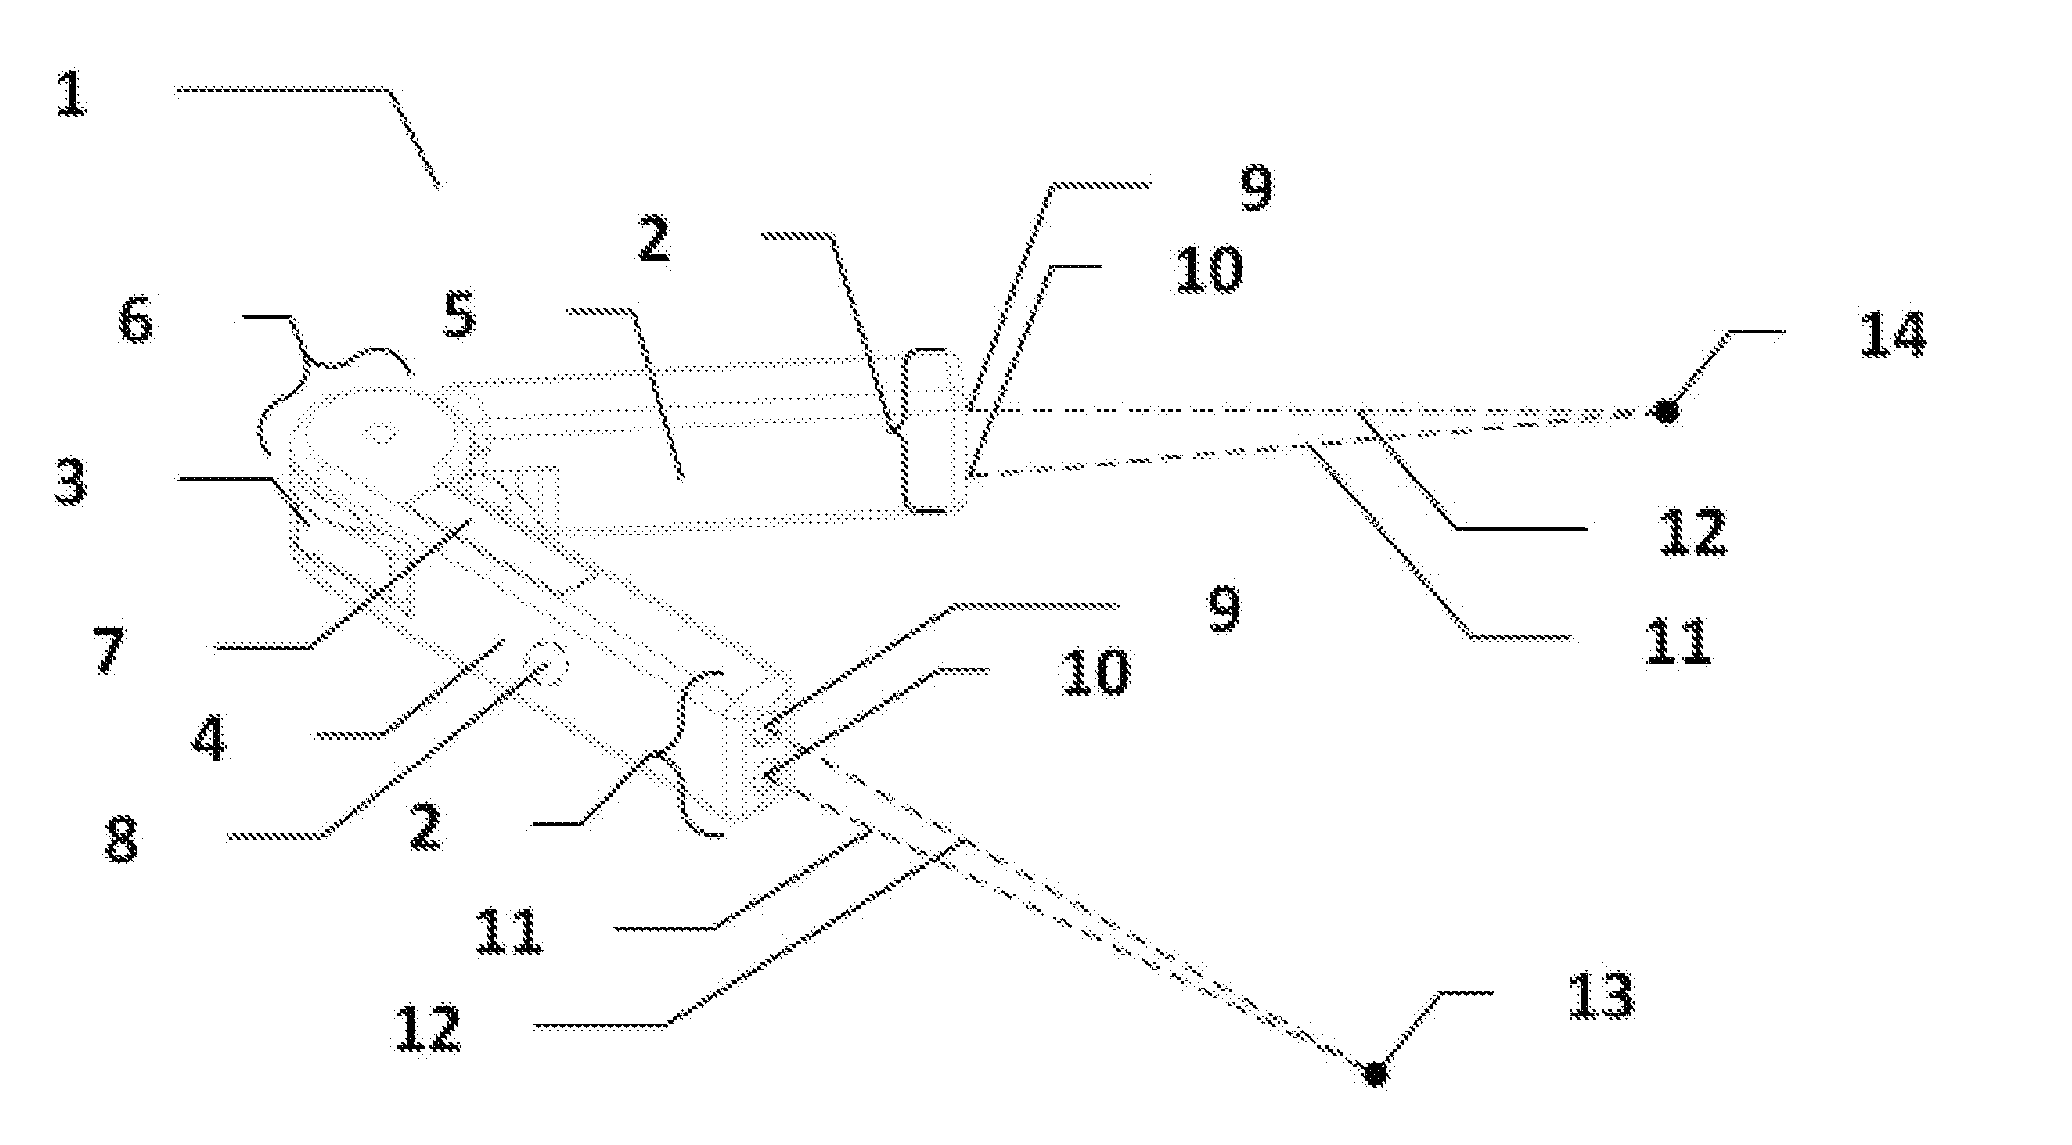 System and Method for Determination of Distance Between Two Points in 3-Dimensional Space